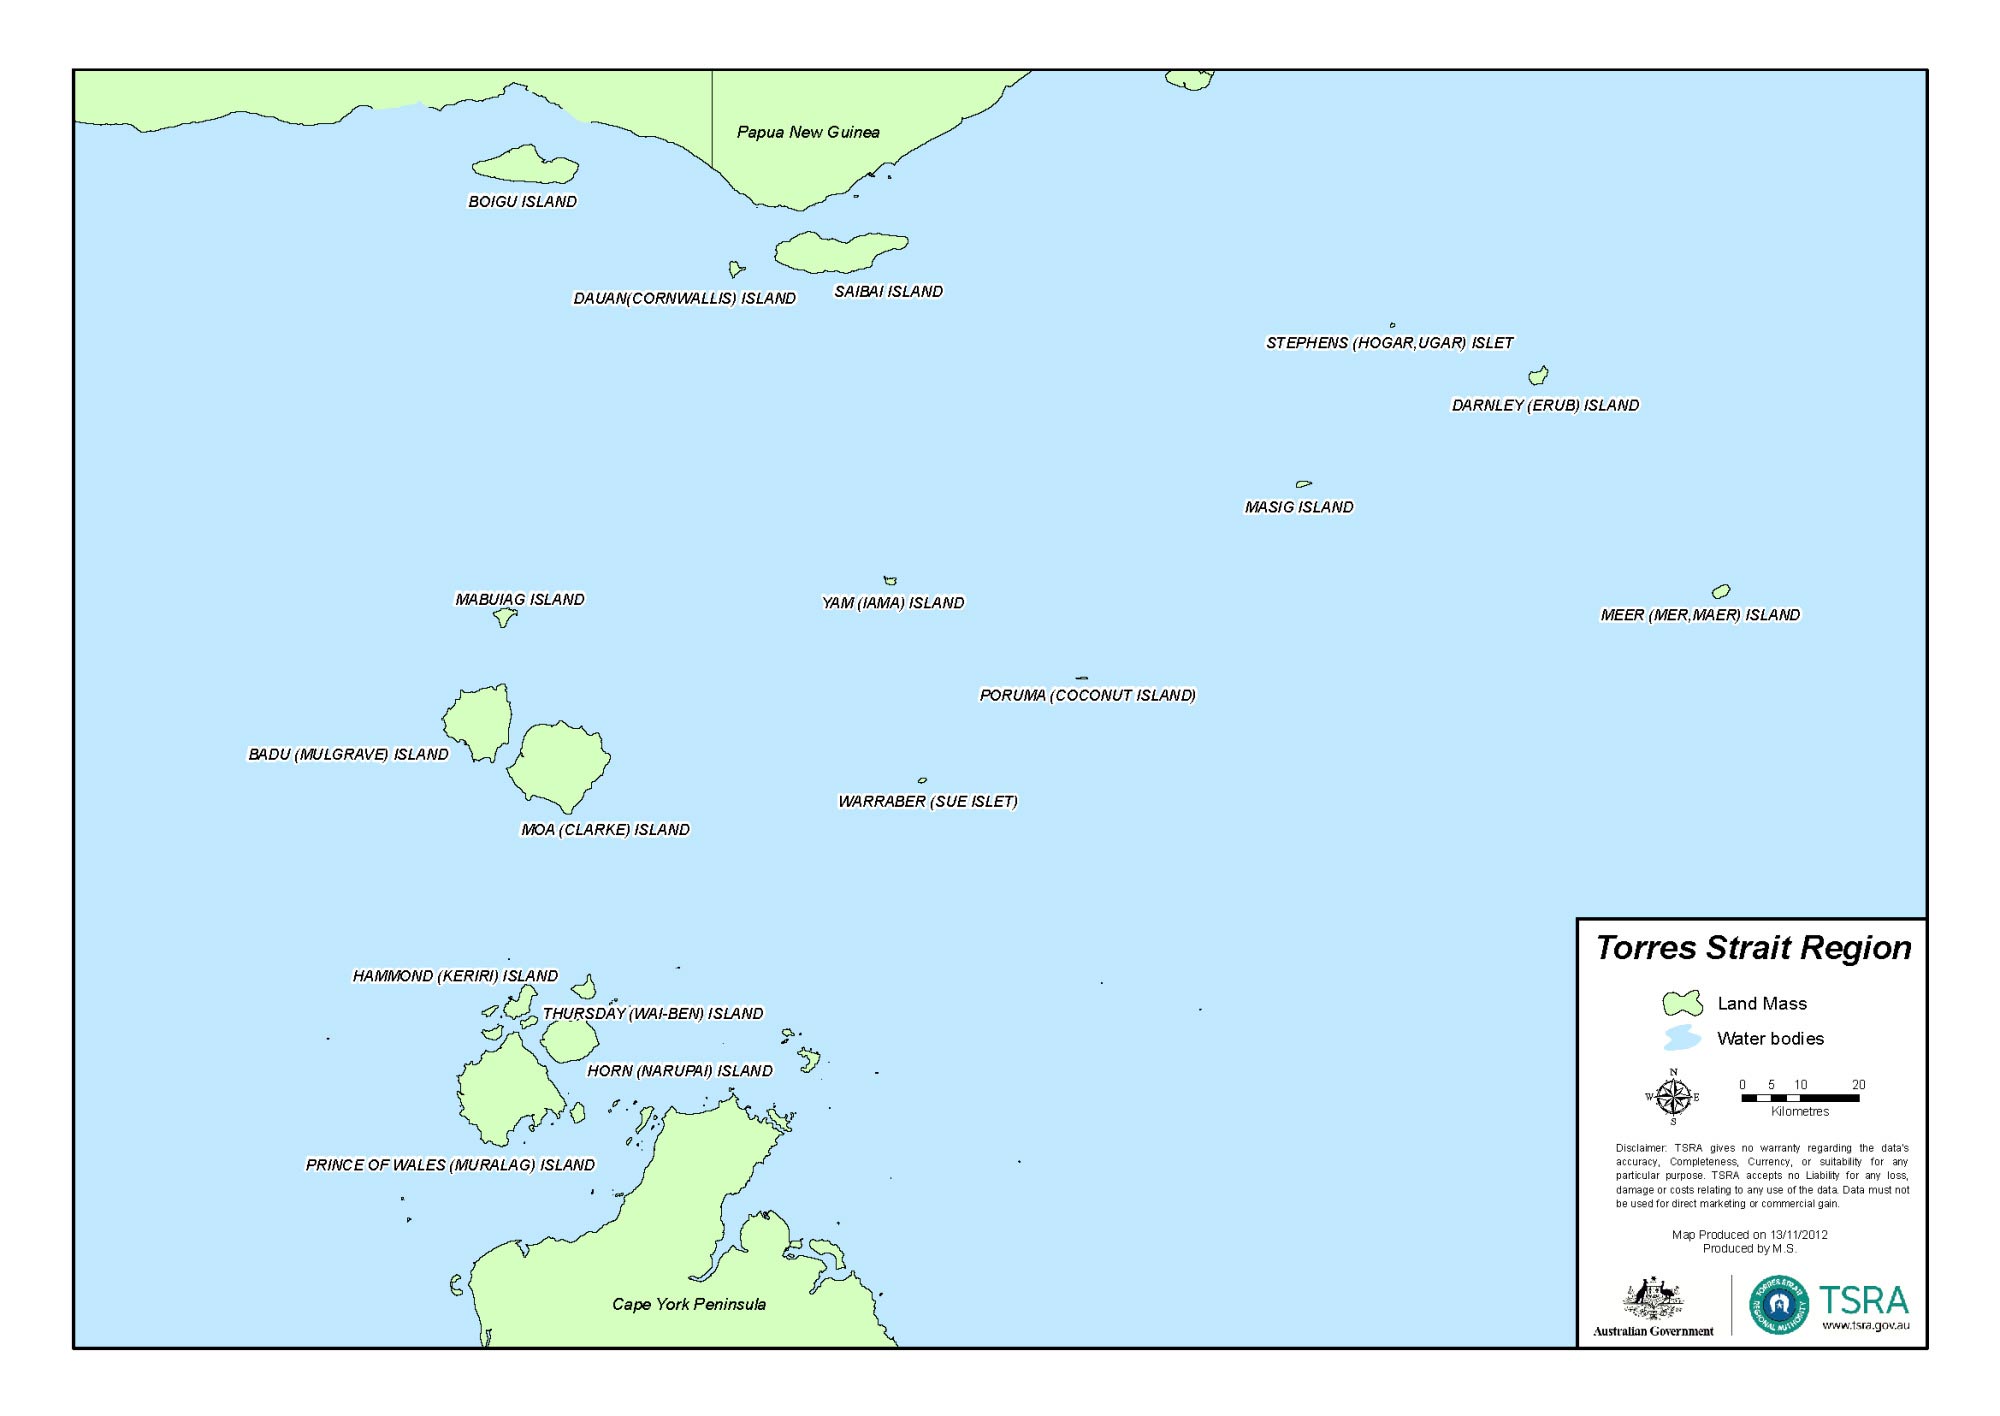 Map A: Map of the Torres Strait